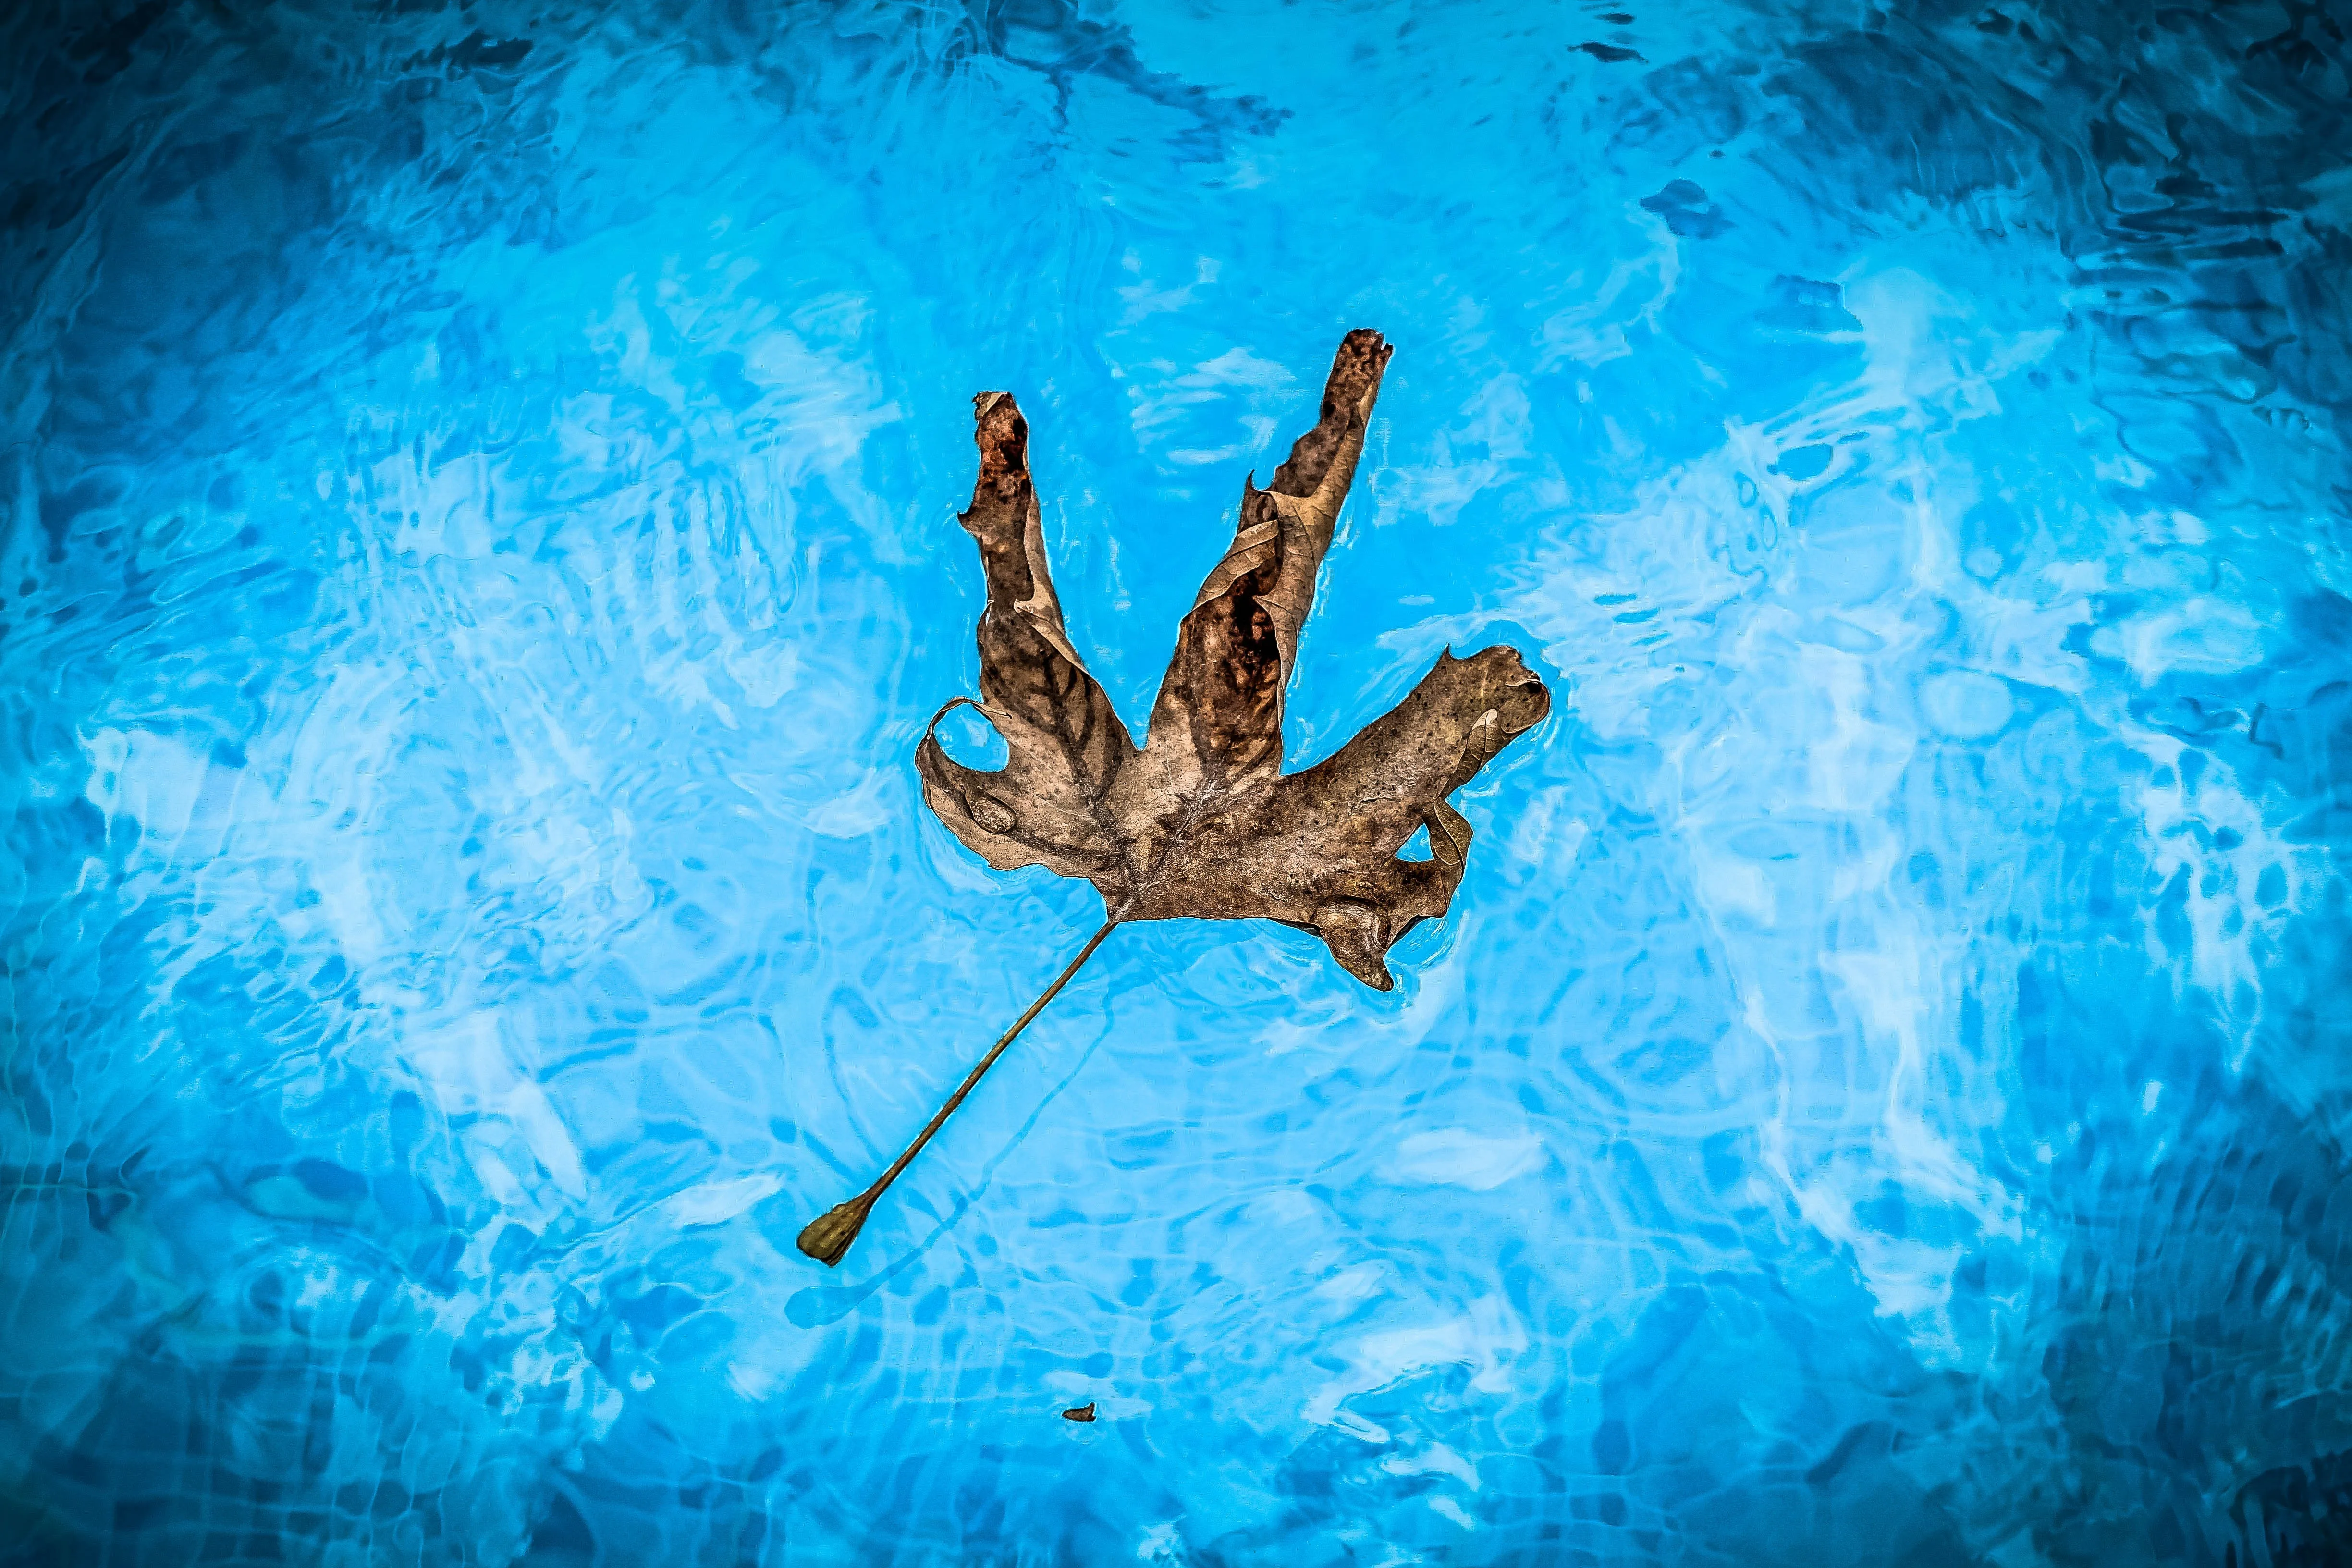 A picture of a leaf in a pool